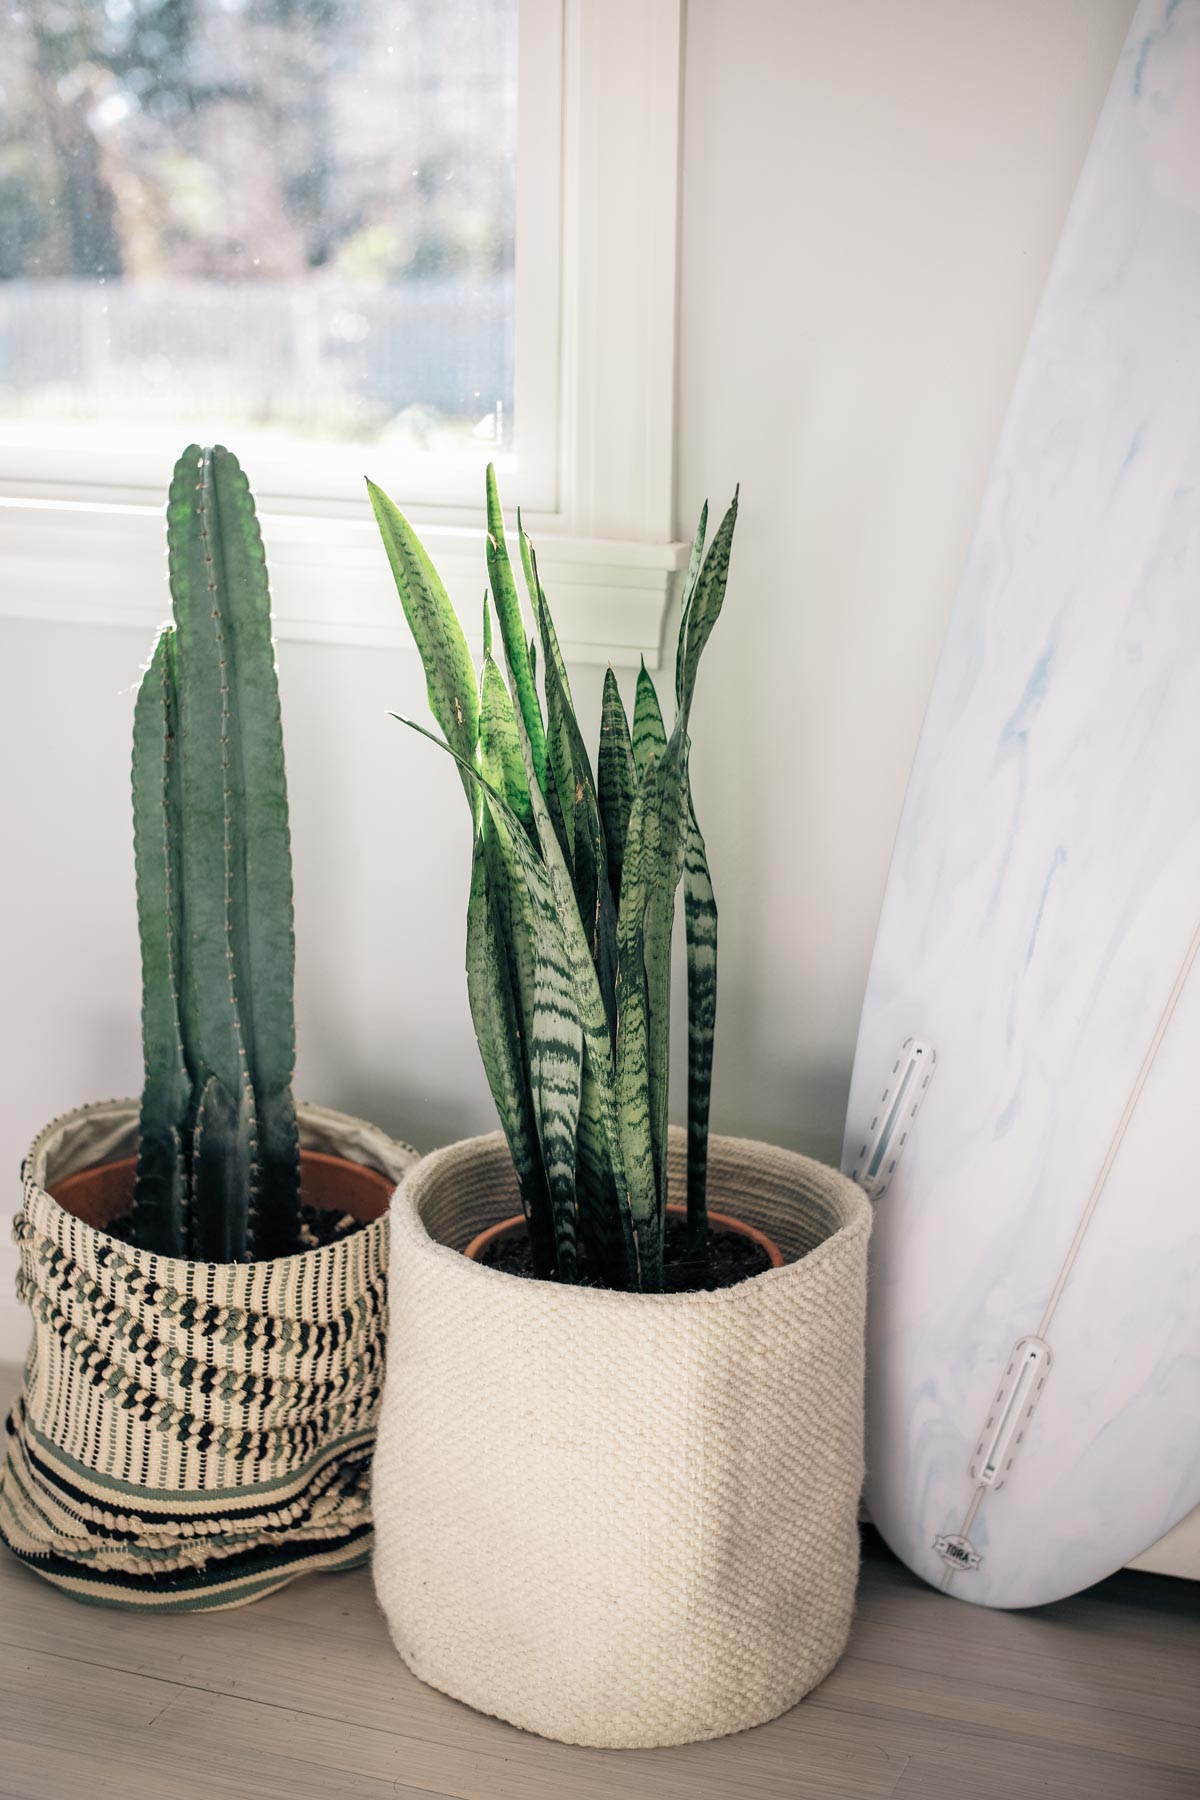 Jess Ann Kirby uses woven planters as home decor